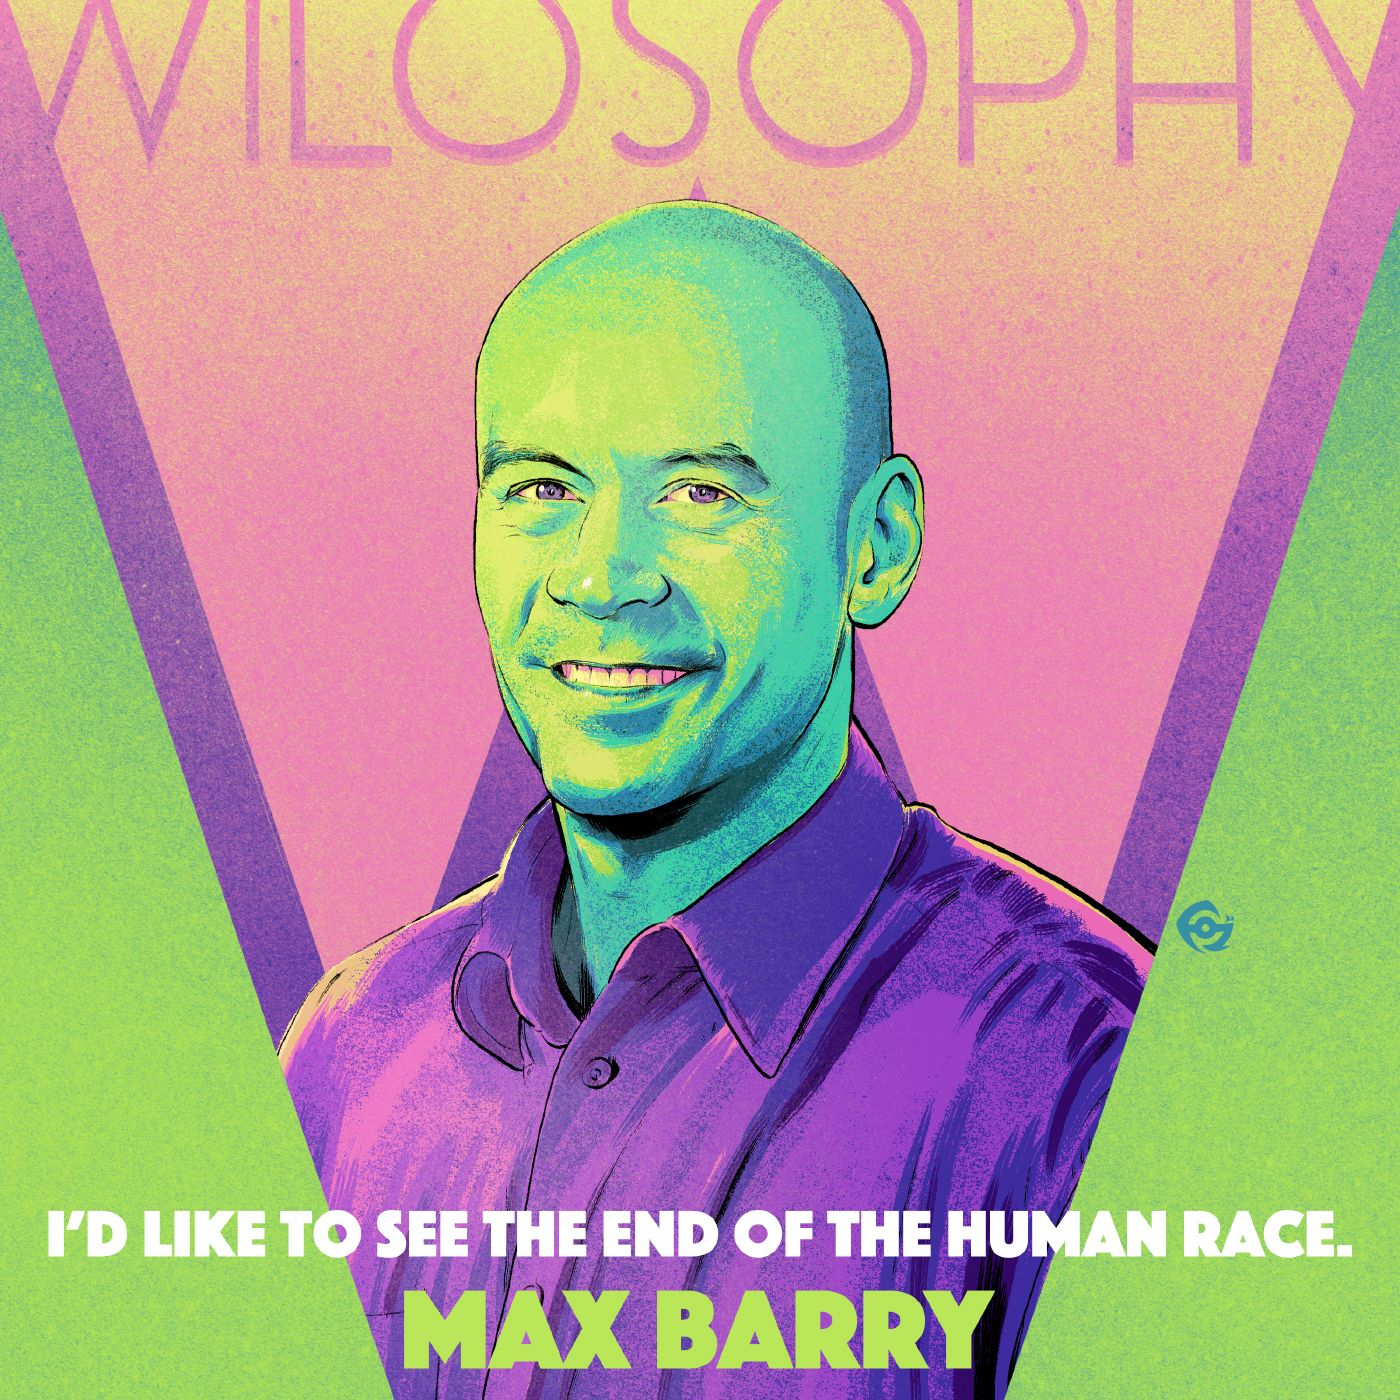 WILOSOPHY with Max Barry (Part 2)